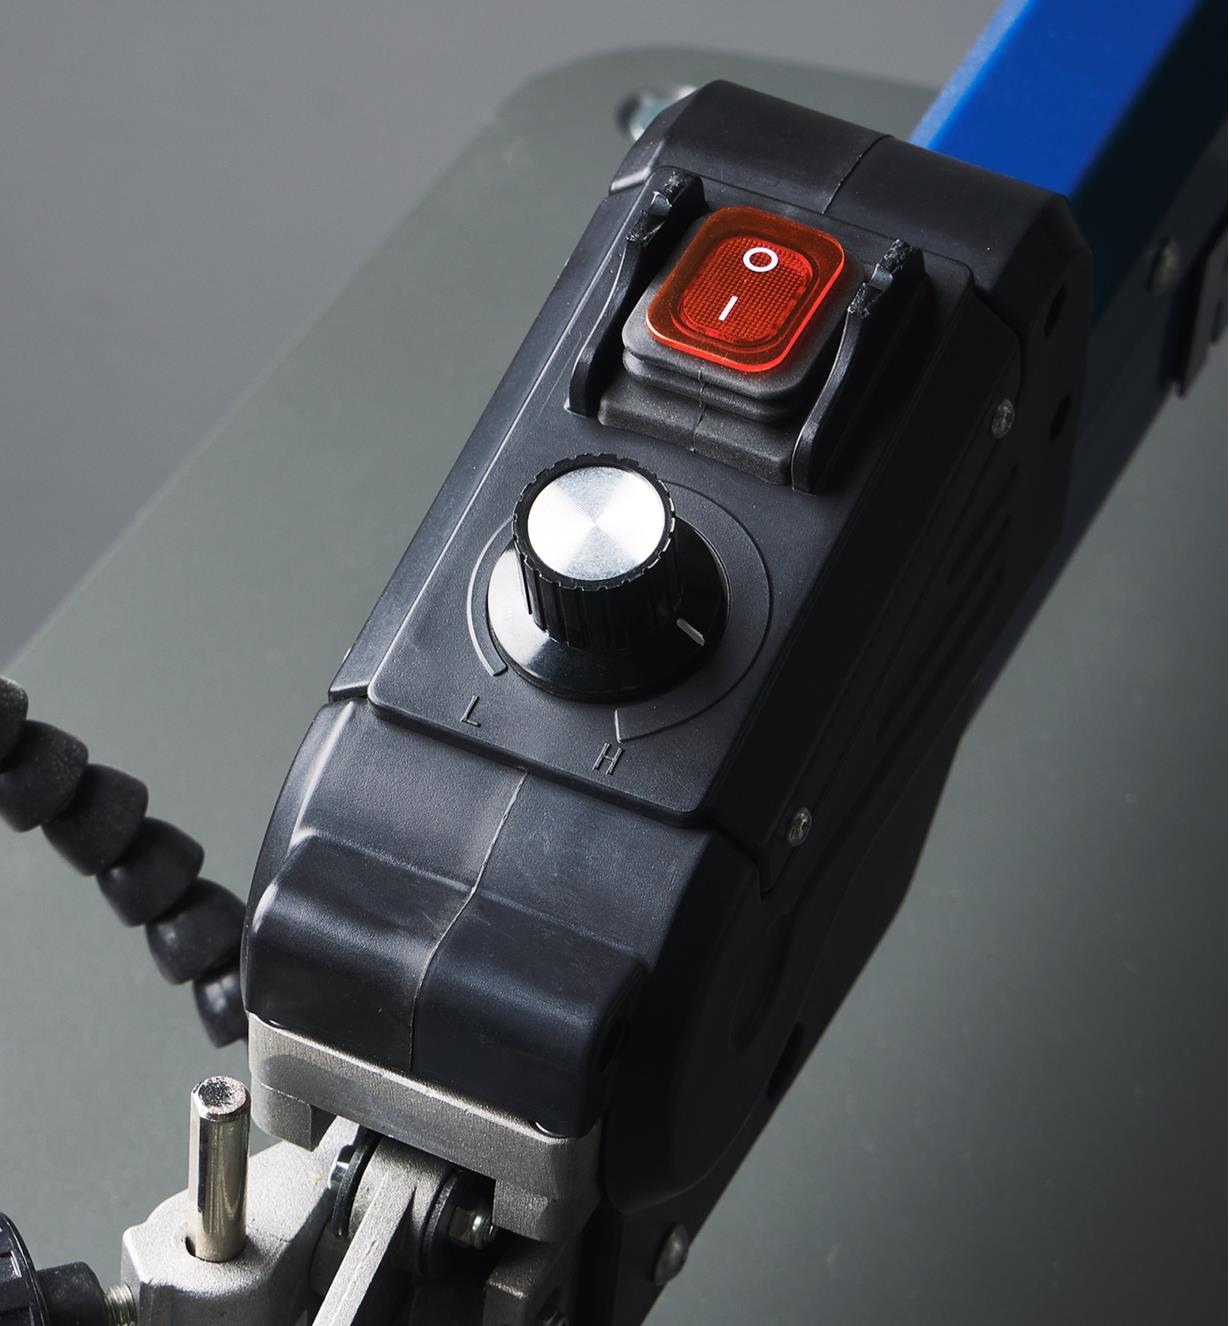 The power switch and speed control knob on the bevel at the front of the arm